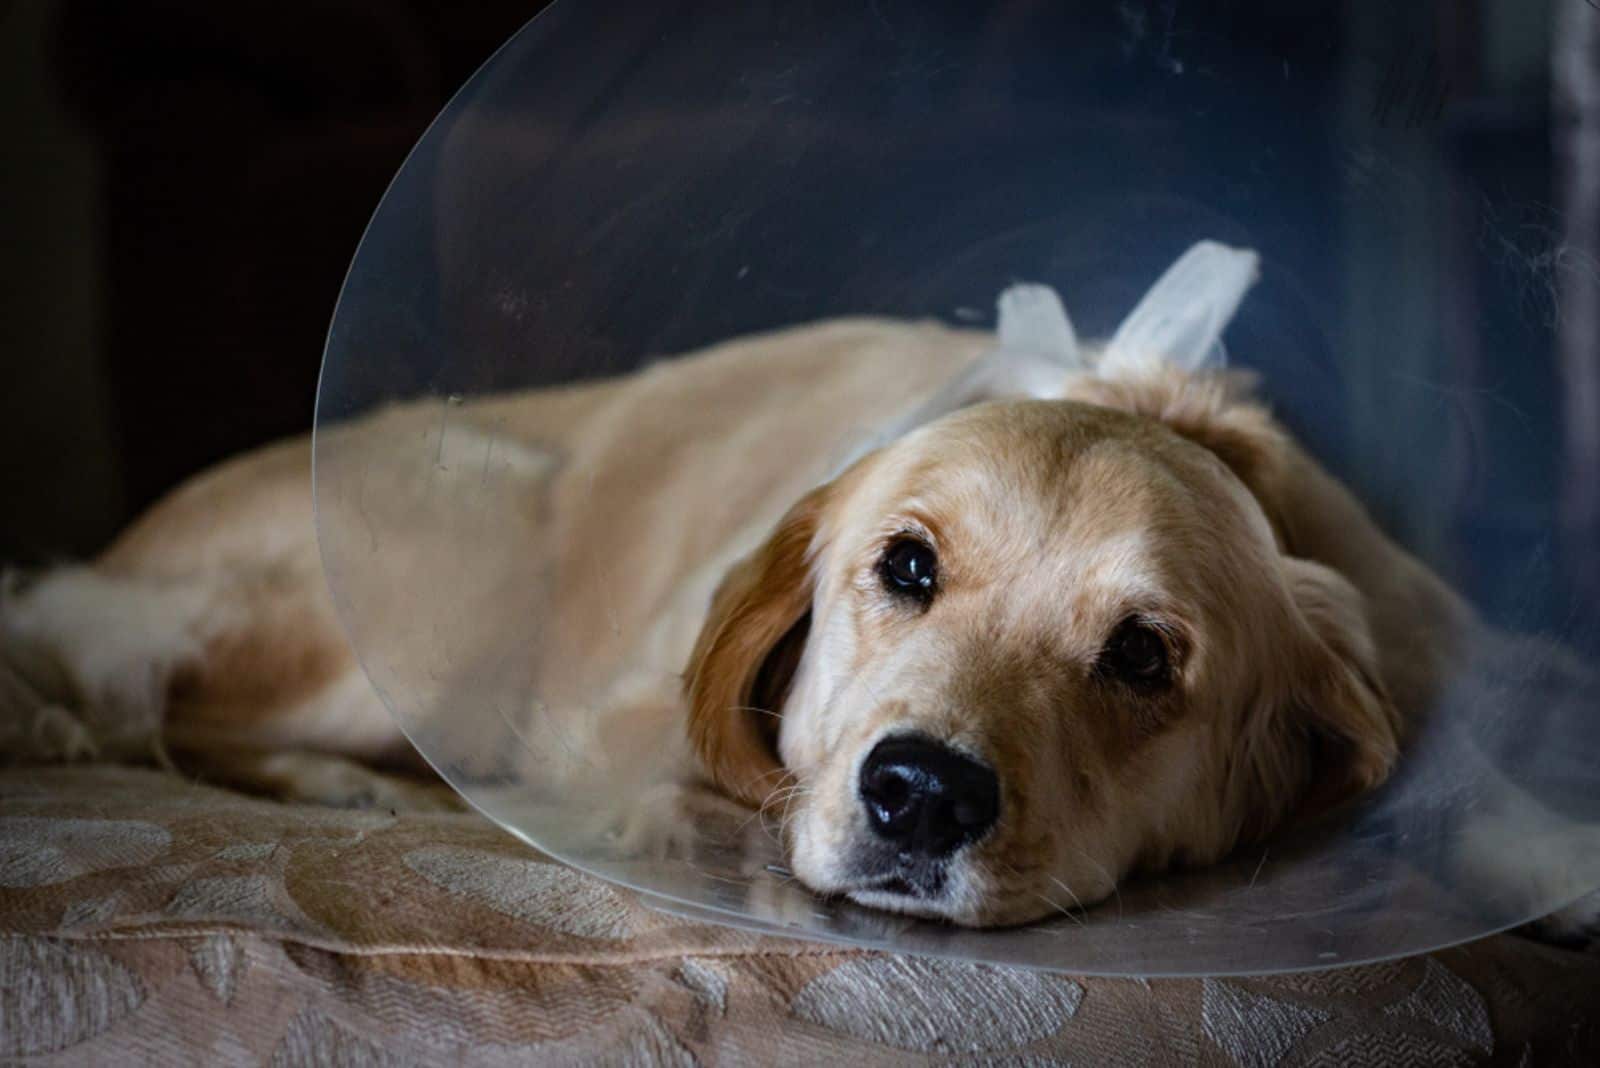 Puppy looking sad while wearing a "cone of shame" to prevent licking after surgery